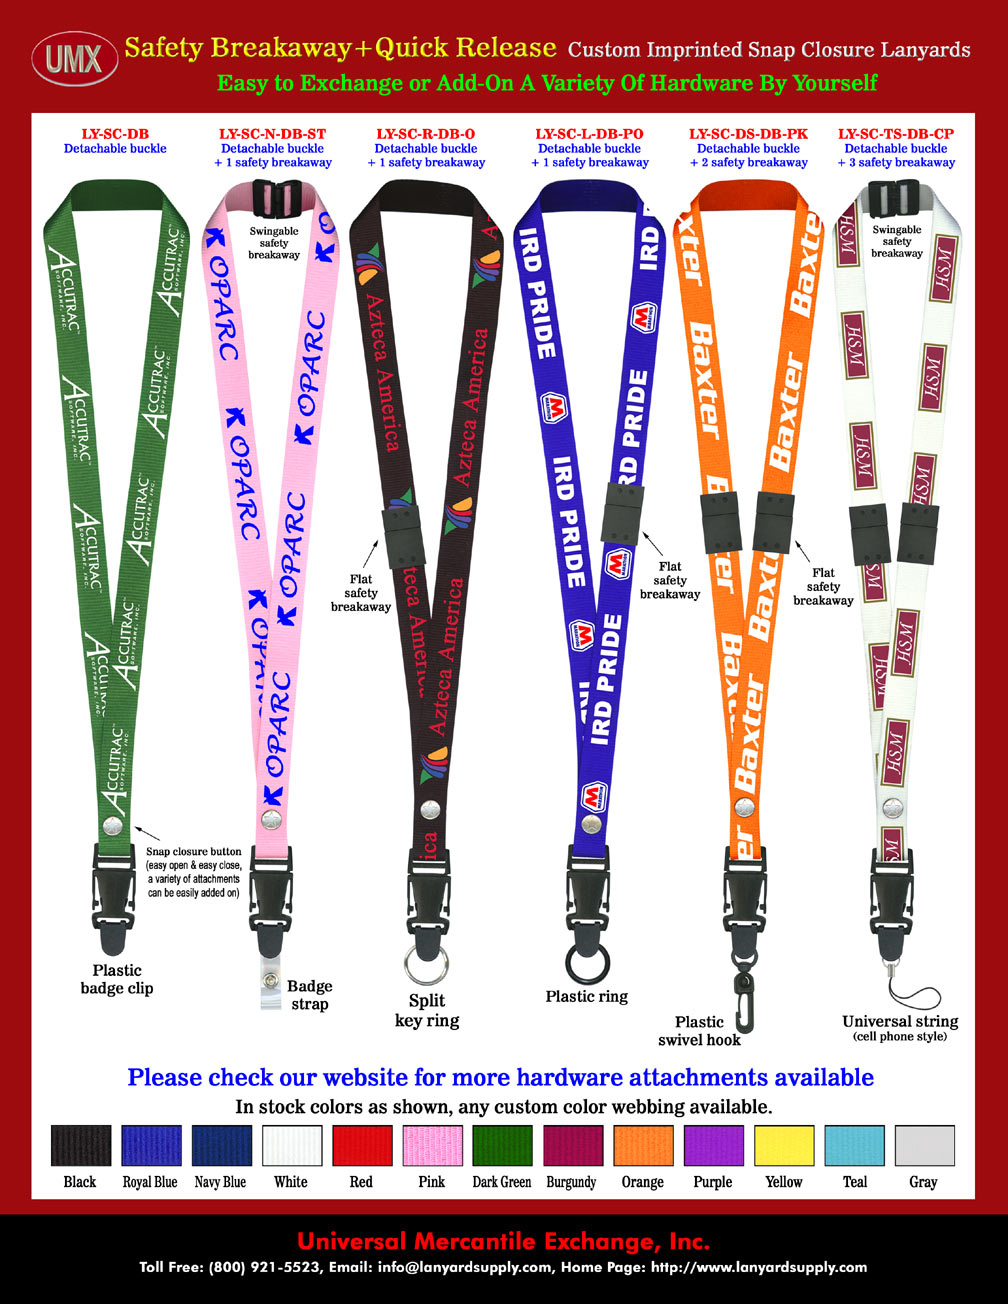 Custom Printed Quick Release and Safety Breakaway Snap-Button Lanyards